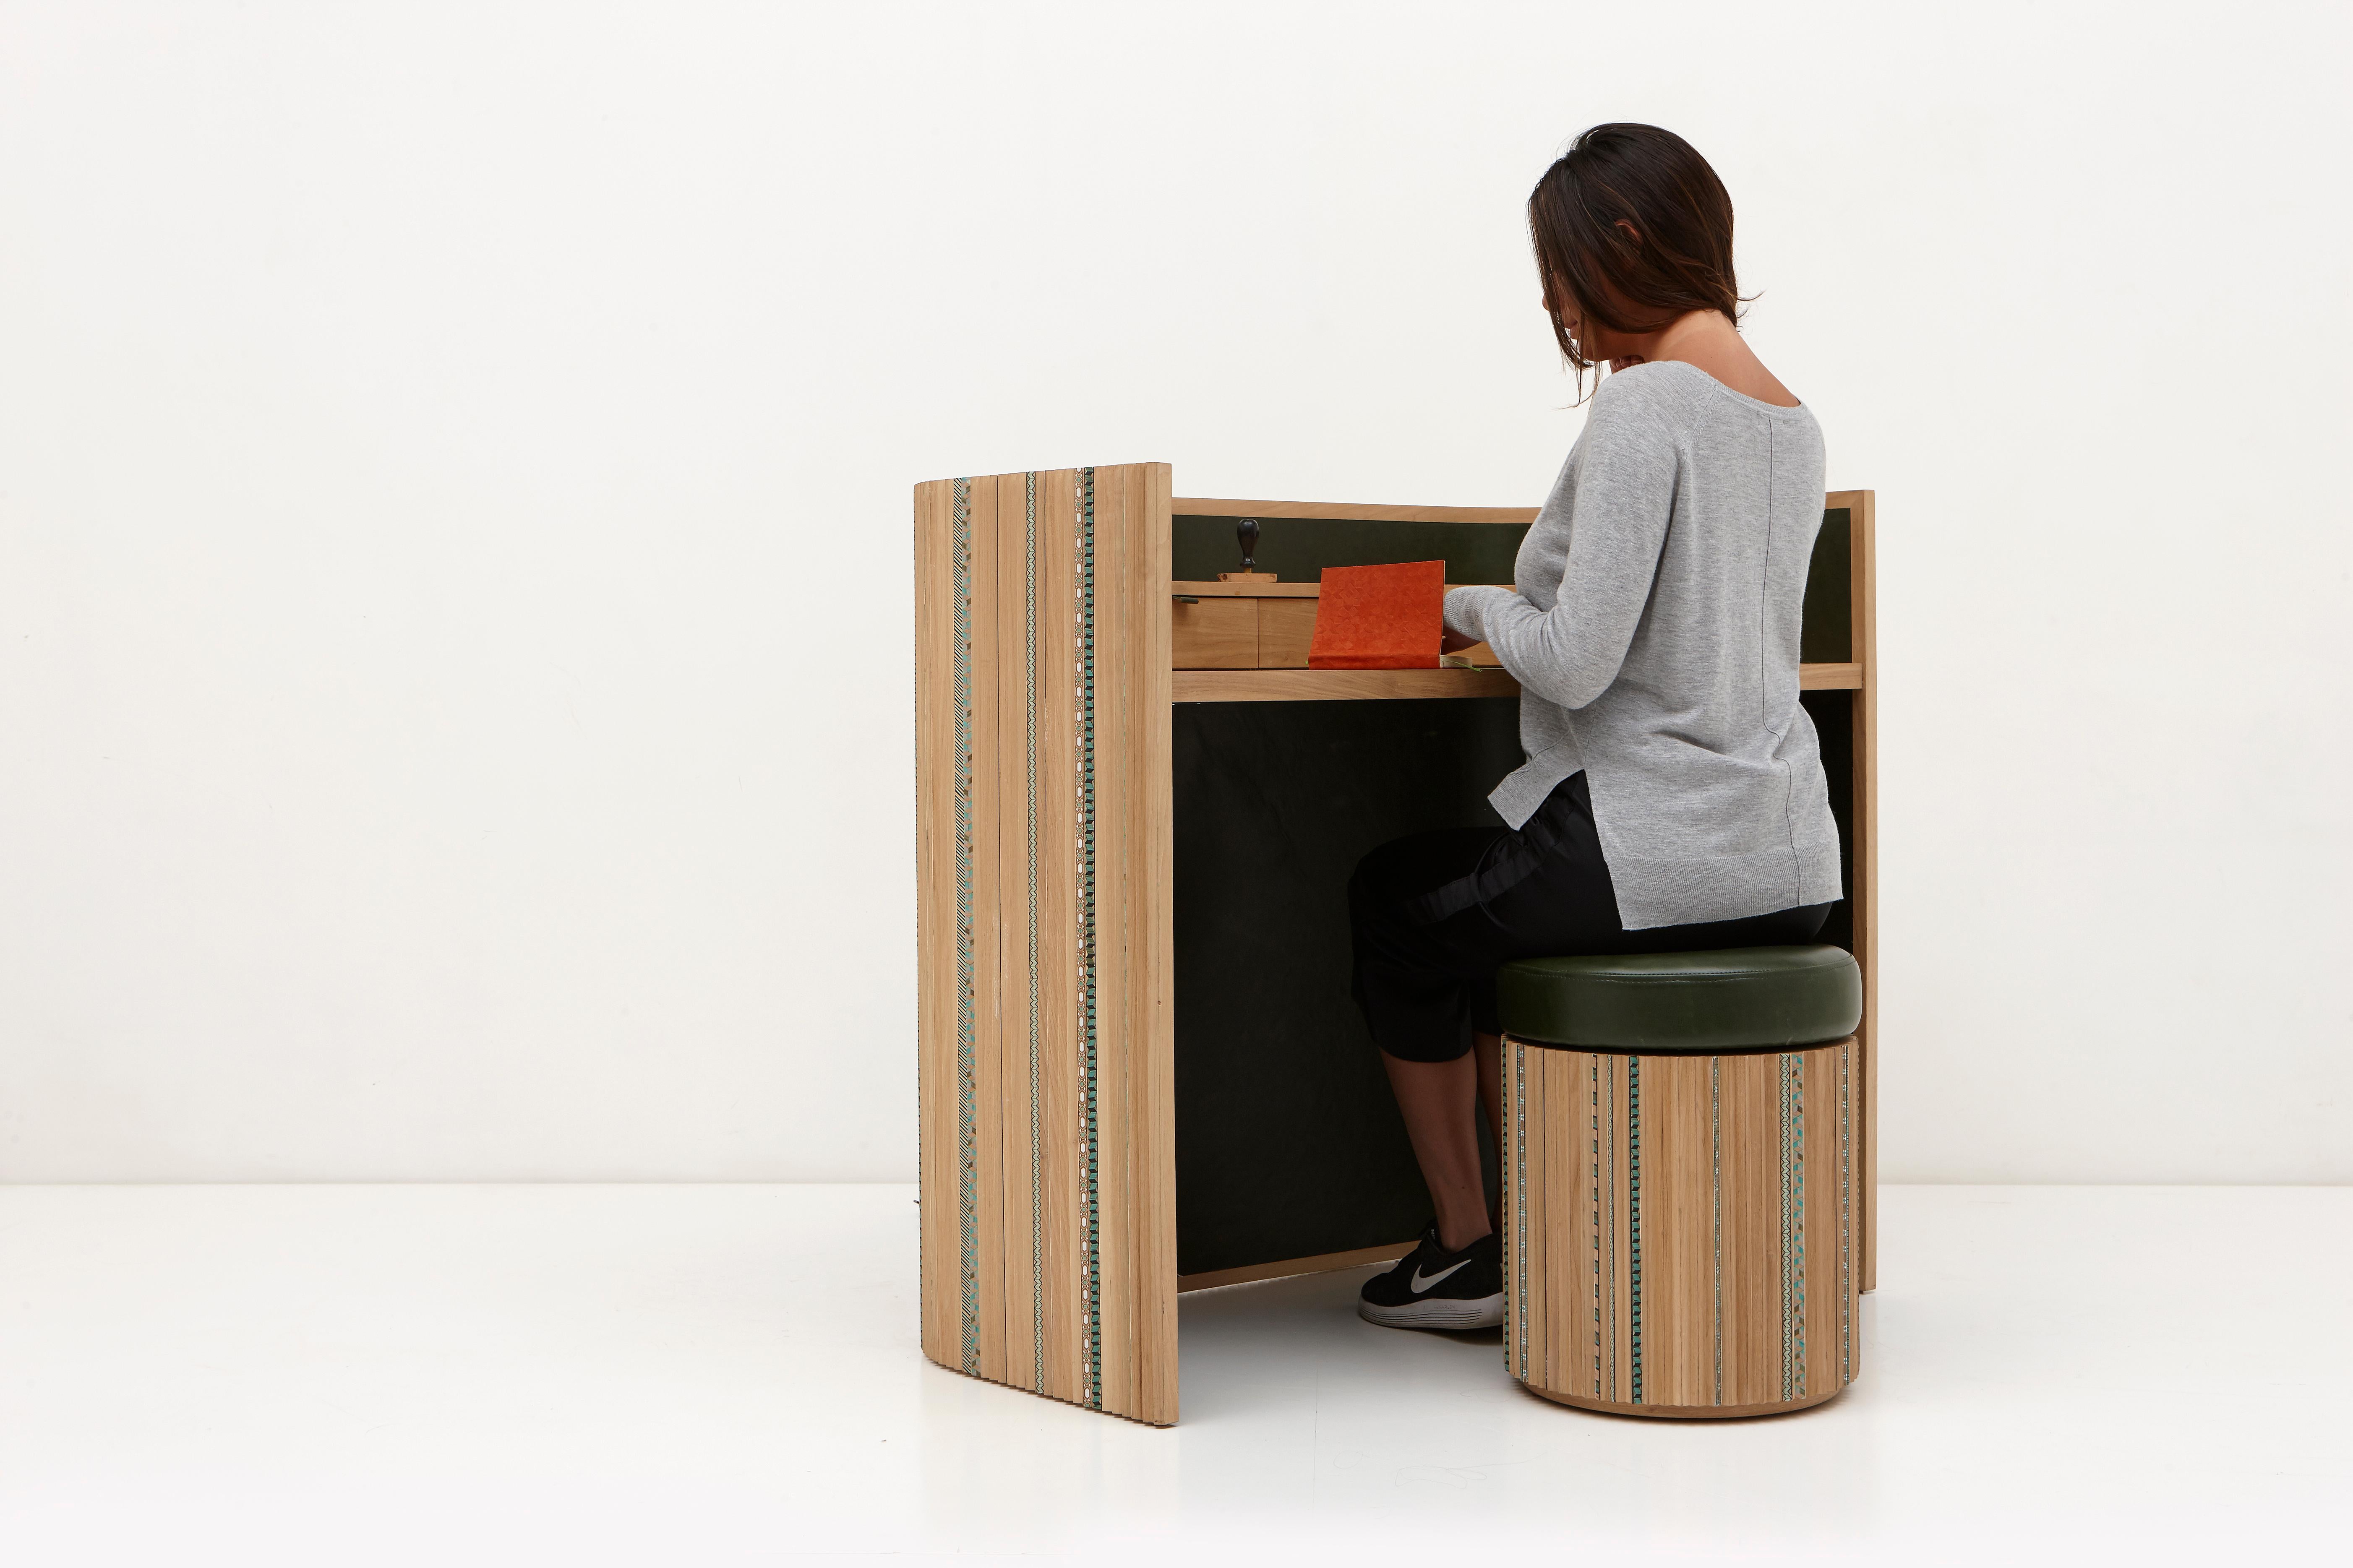 The aim of this collection is to create a new dialogue around craft that has room for playfulness and joy too. It is reflected in the Funquetry pleated secretaire, a compartment desk where strips of different colored wood are sliced and then applied